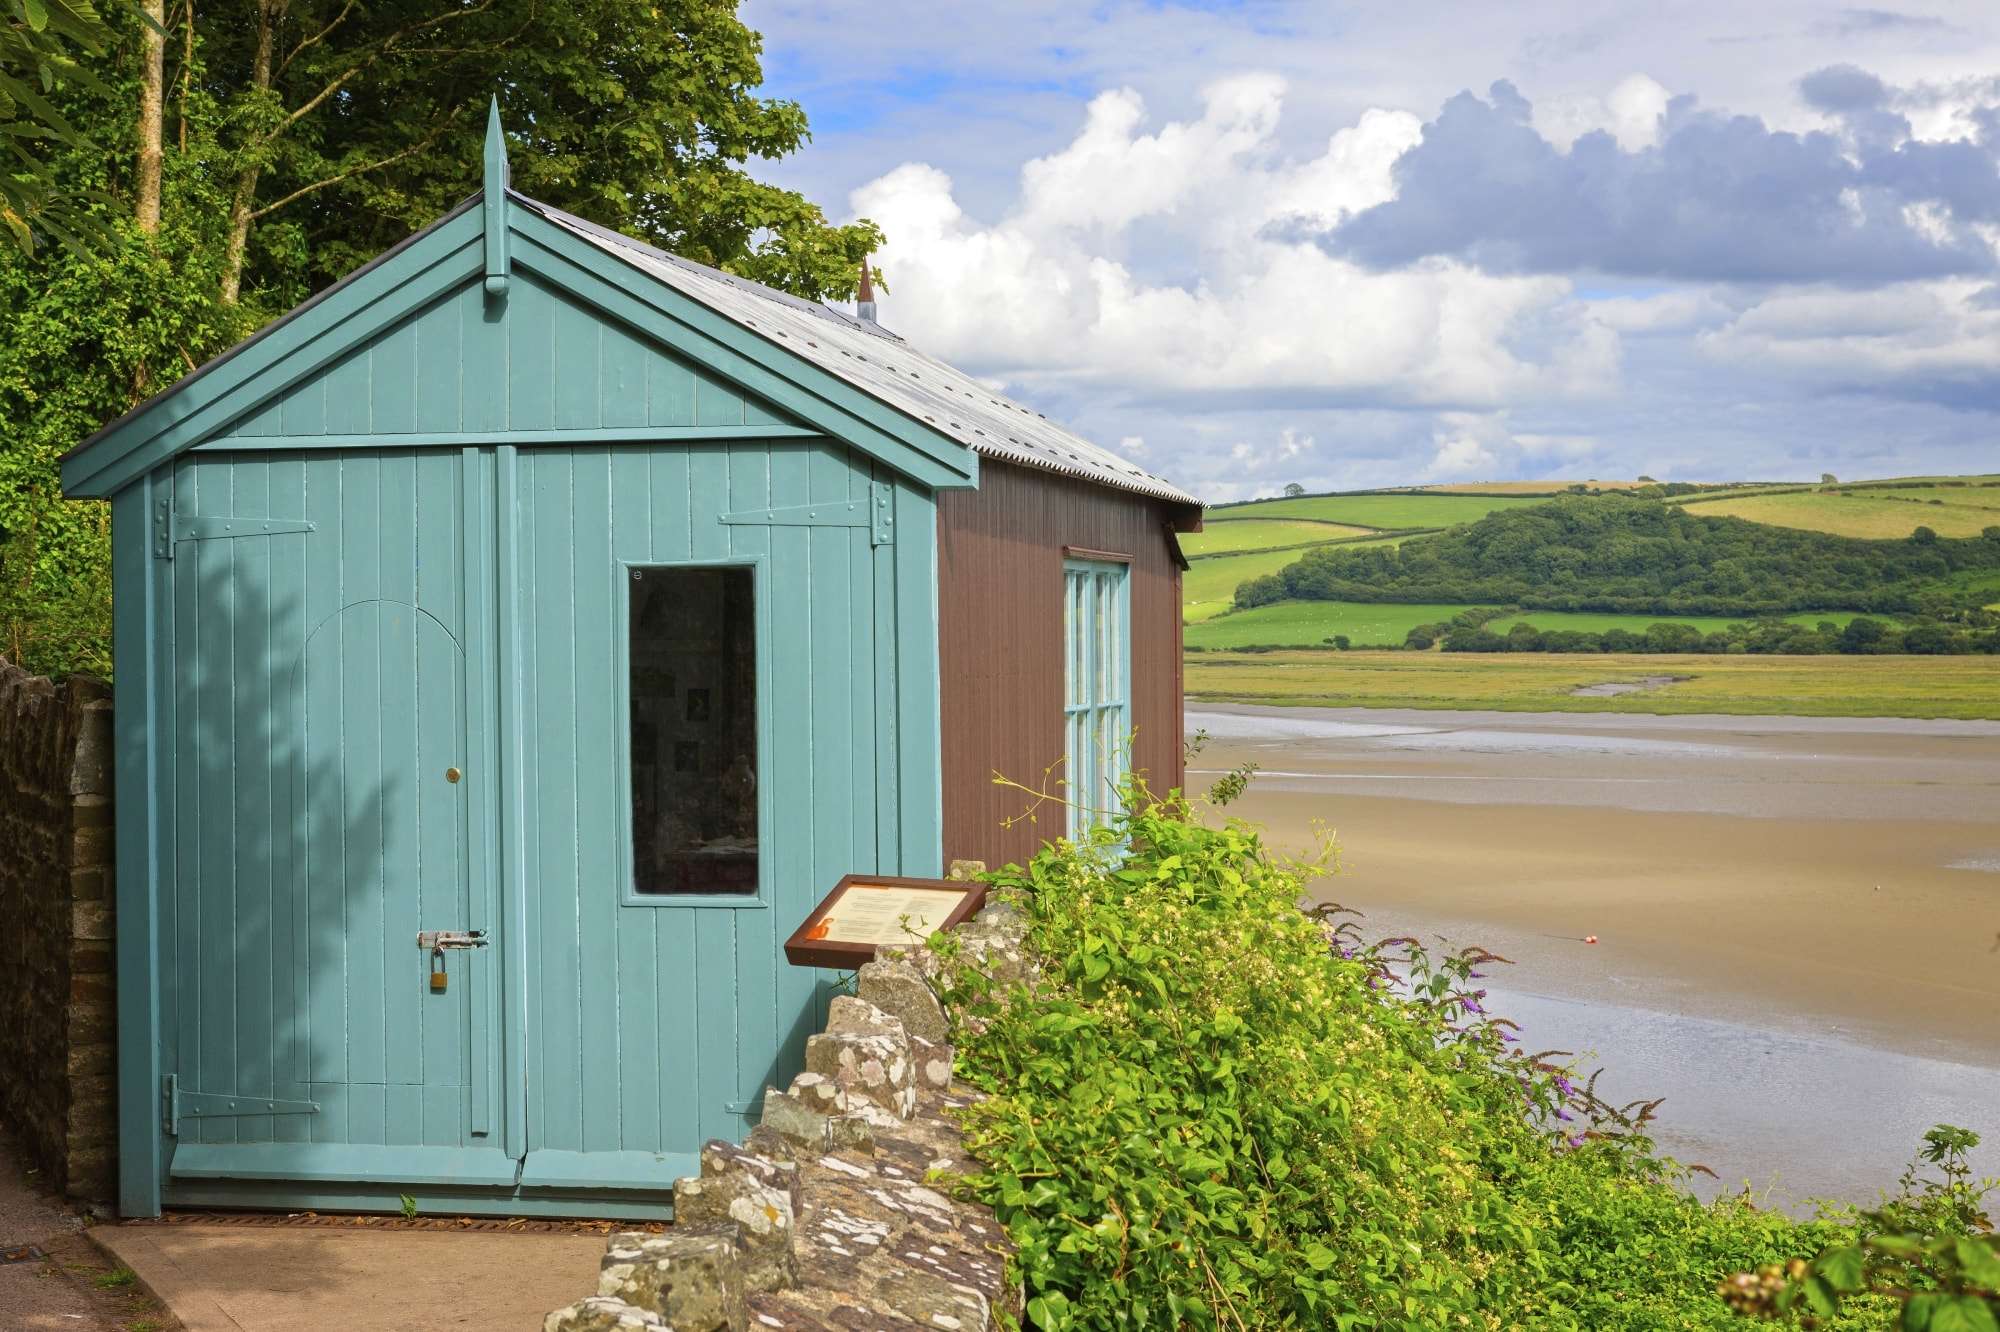 Image of Dylan Thomas' Writing Shed, Laugharne, Camarthenshire, Wales